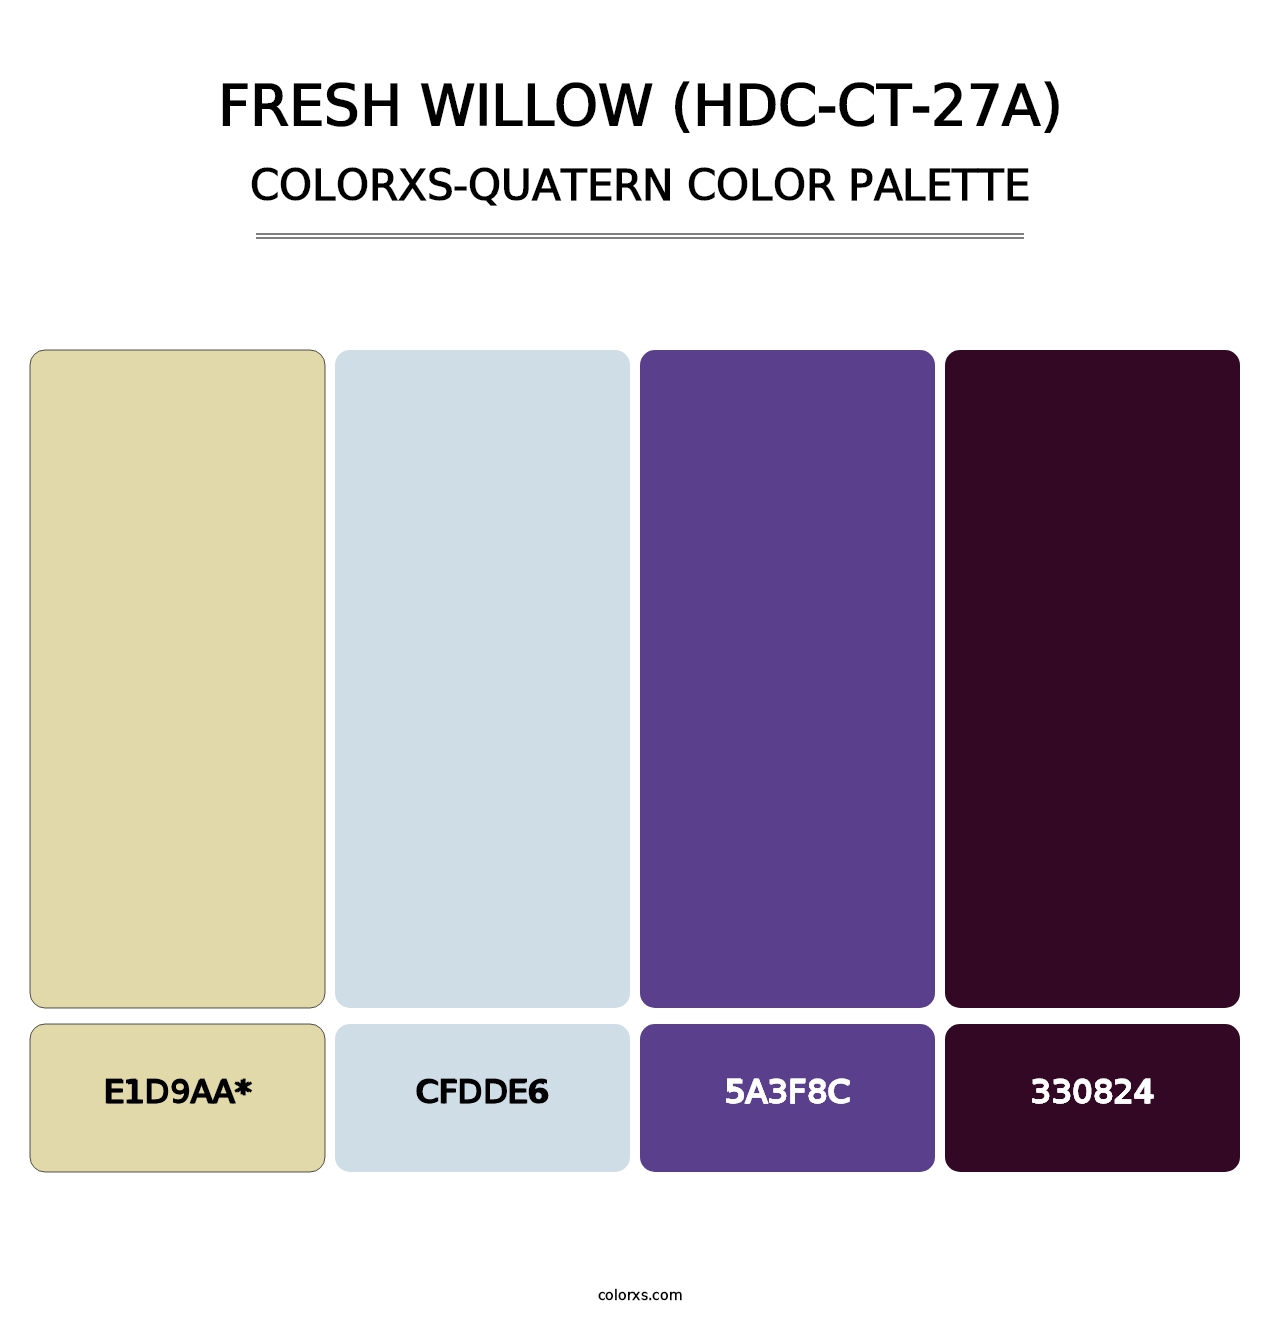 Fresh Willow (HDC-CT-27A) - Colorxs Quatern Palette